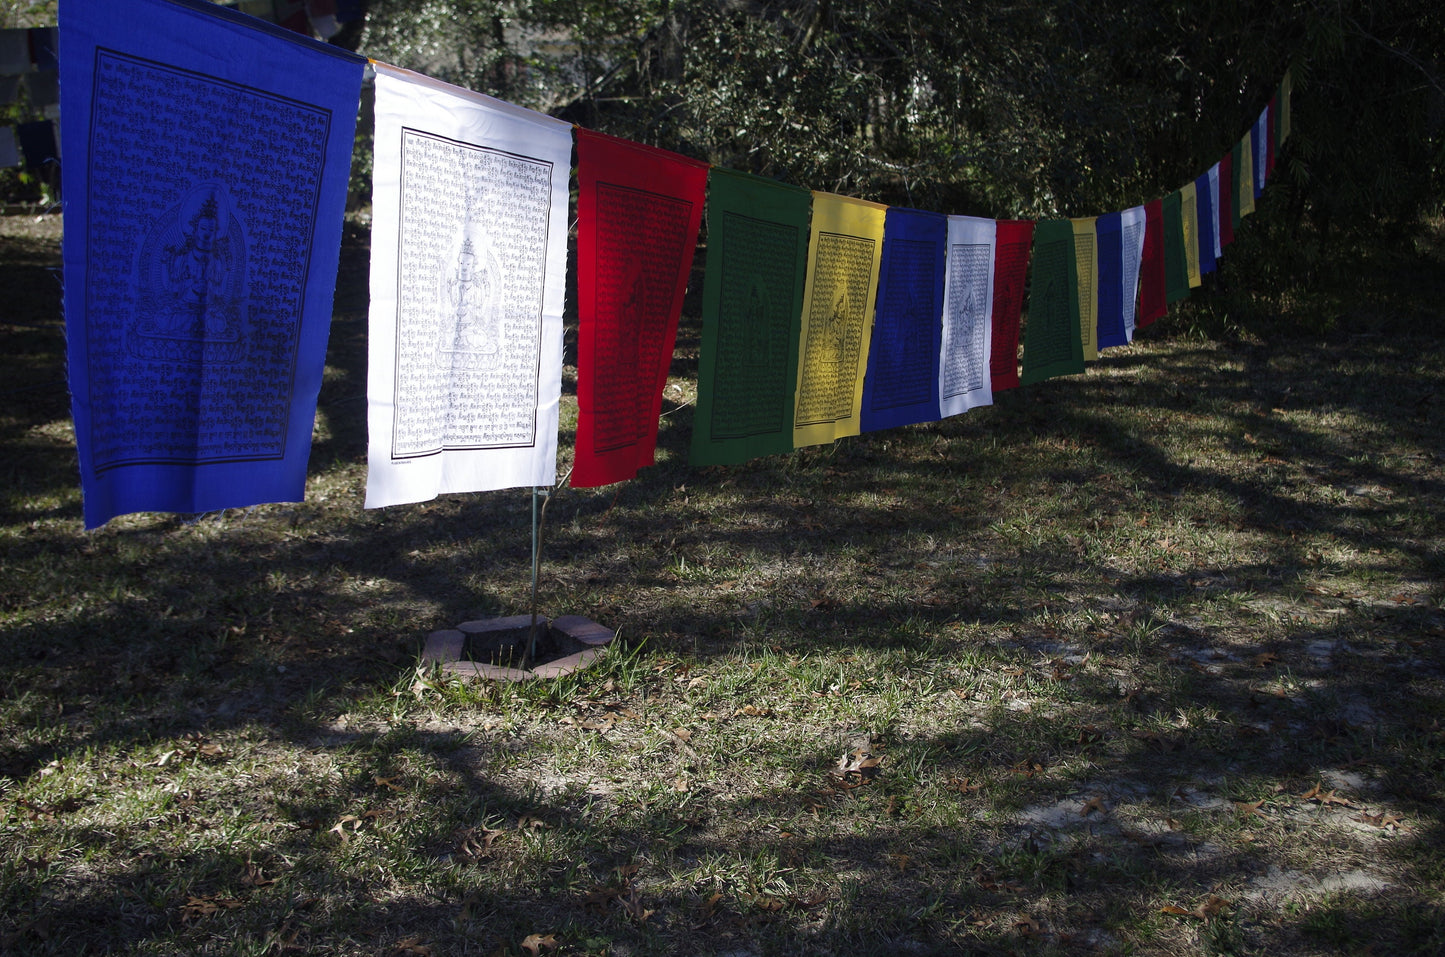 A strand of 25 Chenrezig prayer flags in 5 colors, each 14x17 inches, depicting the Buddha of Compassion hanging outdoors.